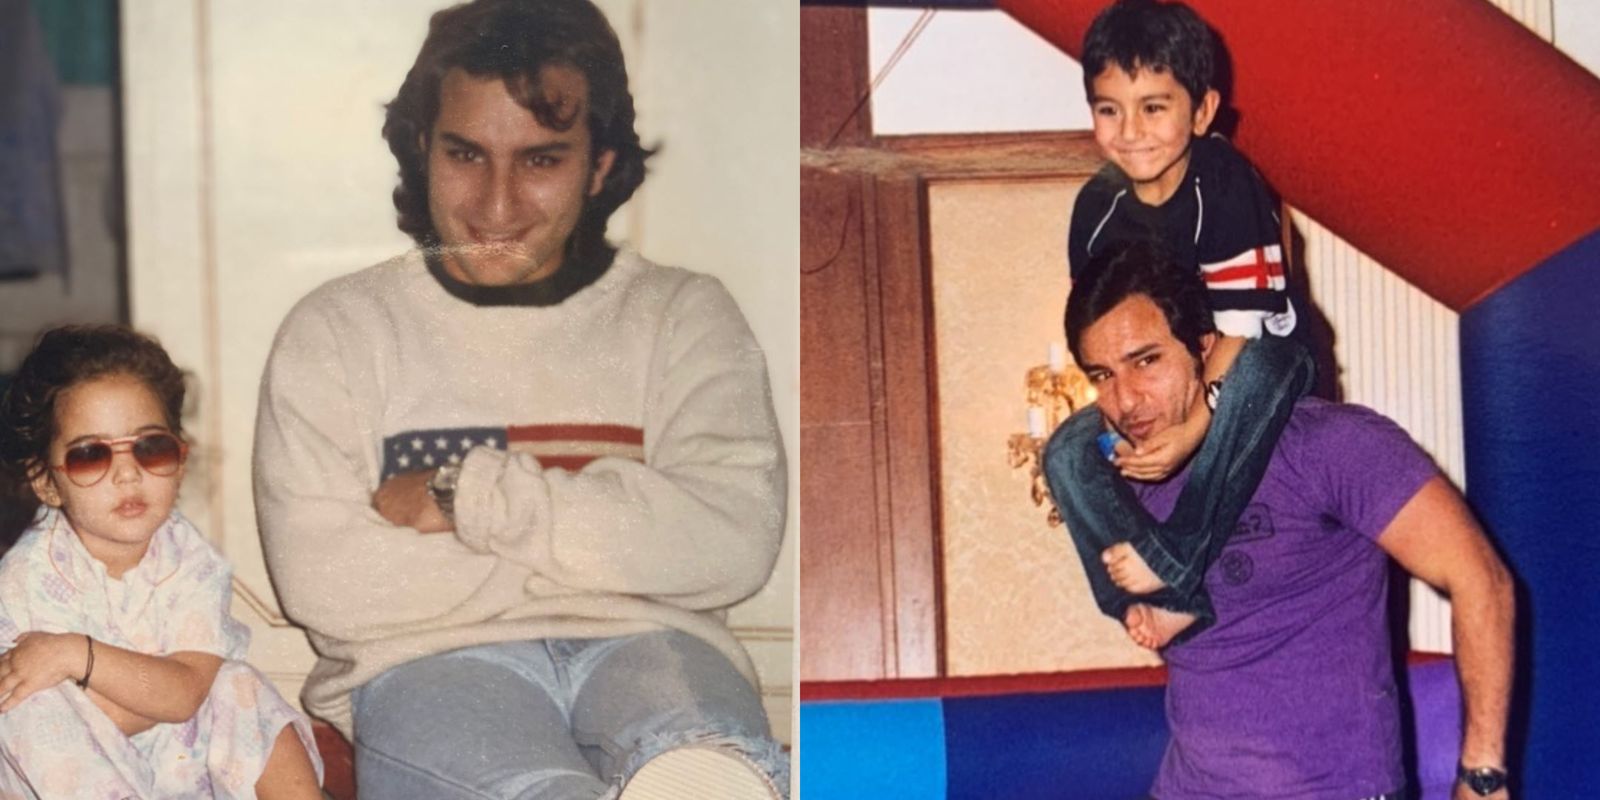 Happy Birthday Saif: Sara Ali Khan Relives Happy Memories With Her Abba Growing Up, Ibrahim Too Shares An Adorable Photo